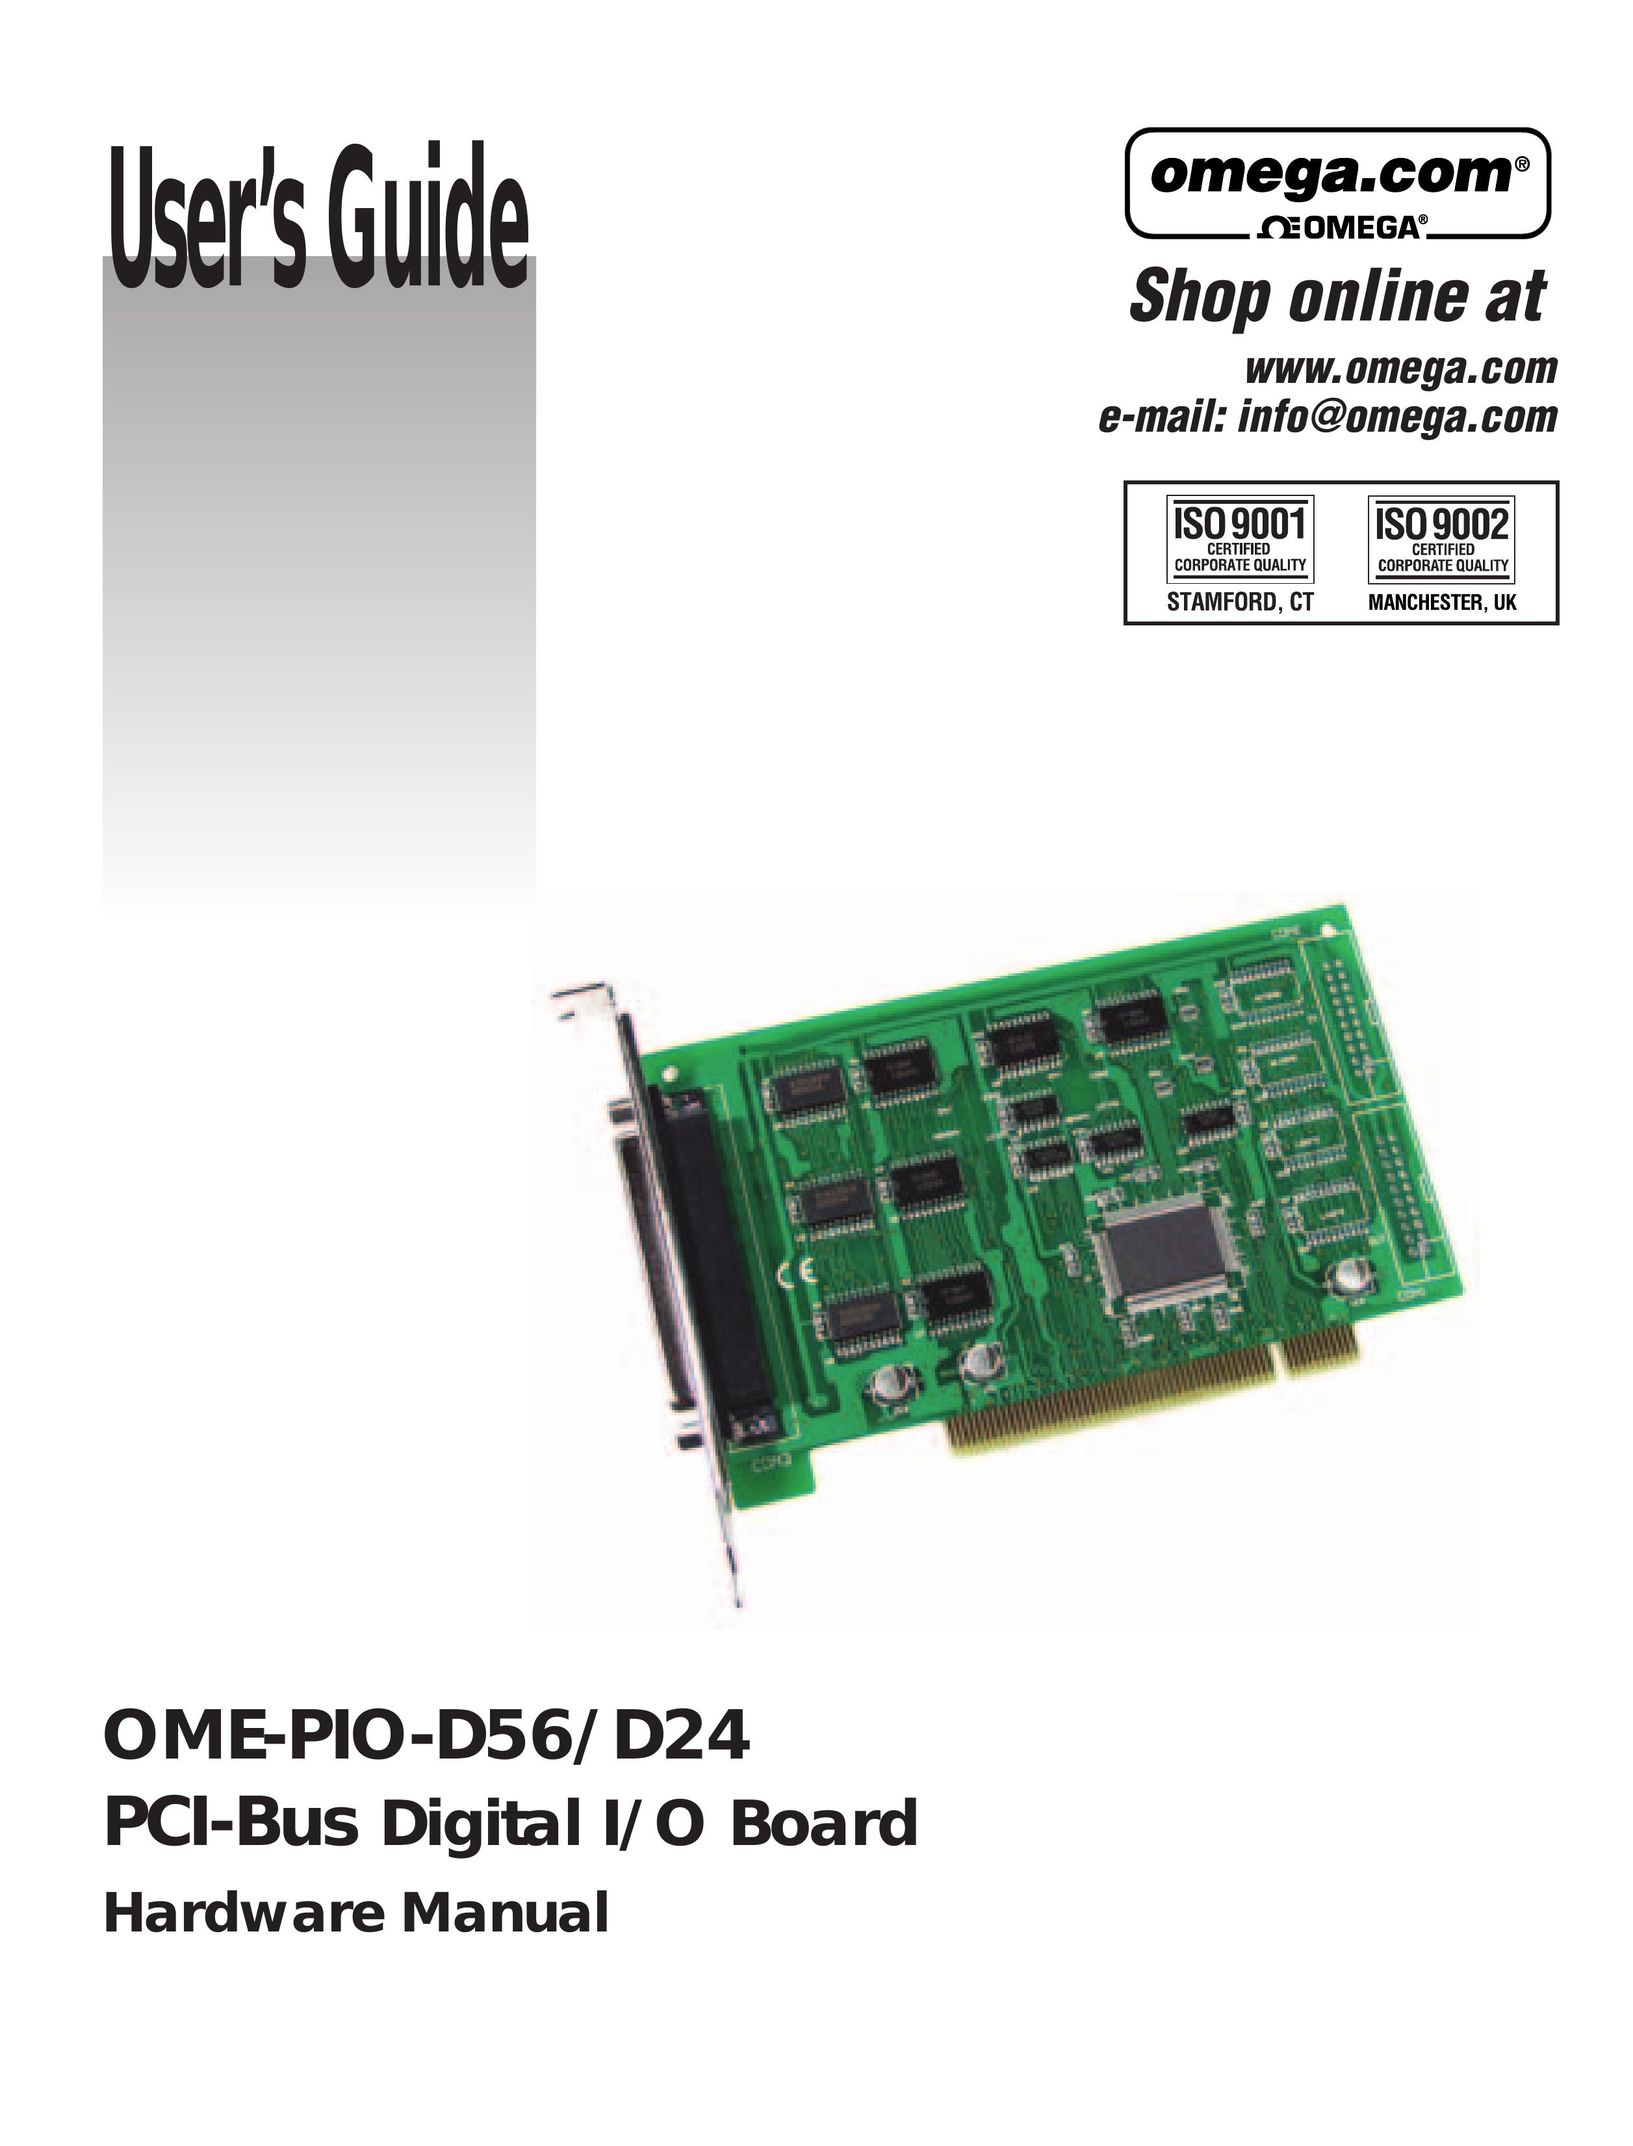 Omega Vehicle Security OME-PIO-D56 Switch User Manual